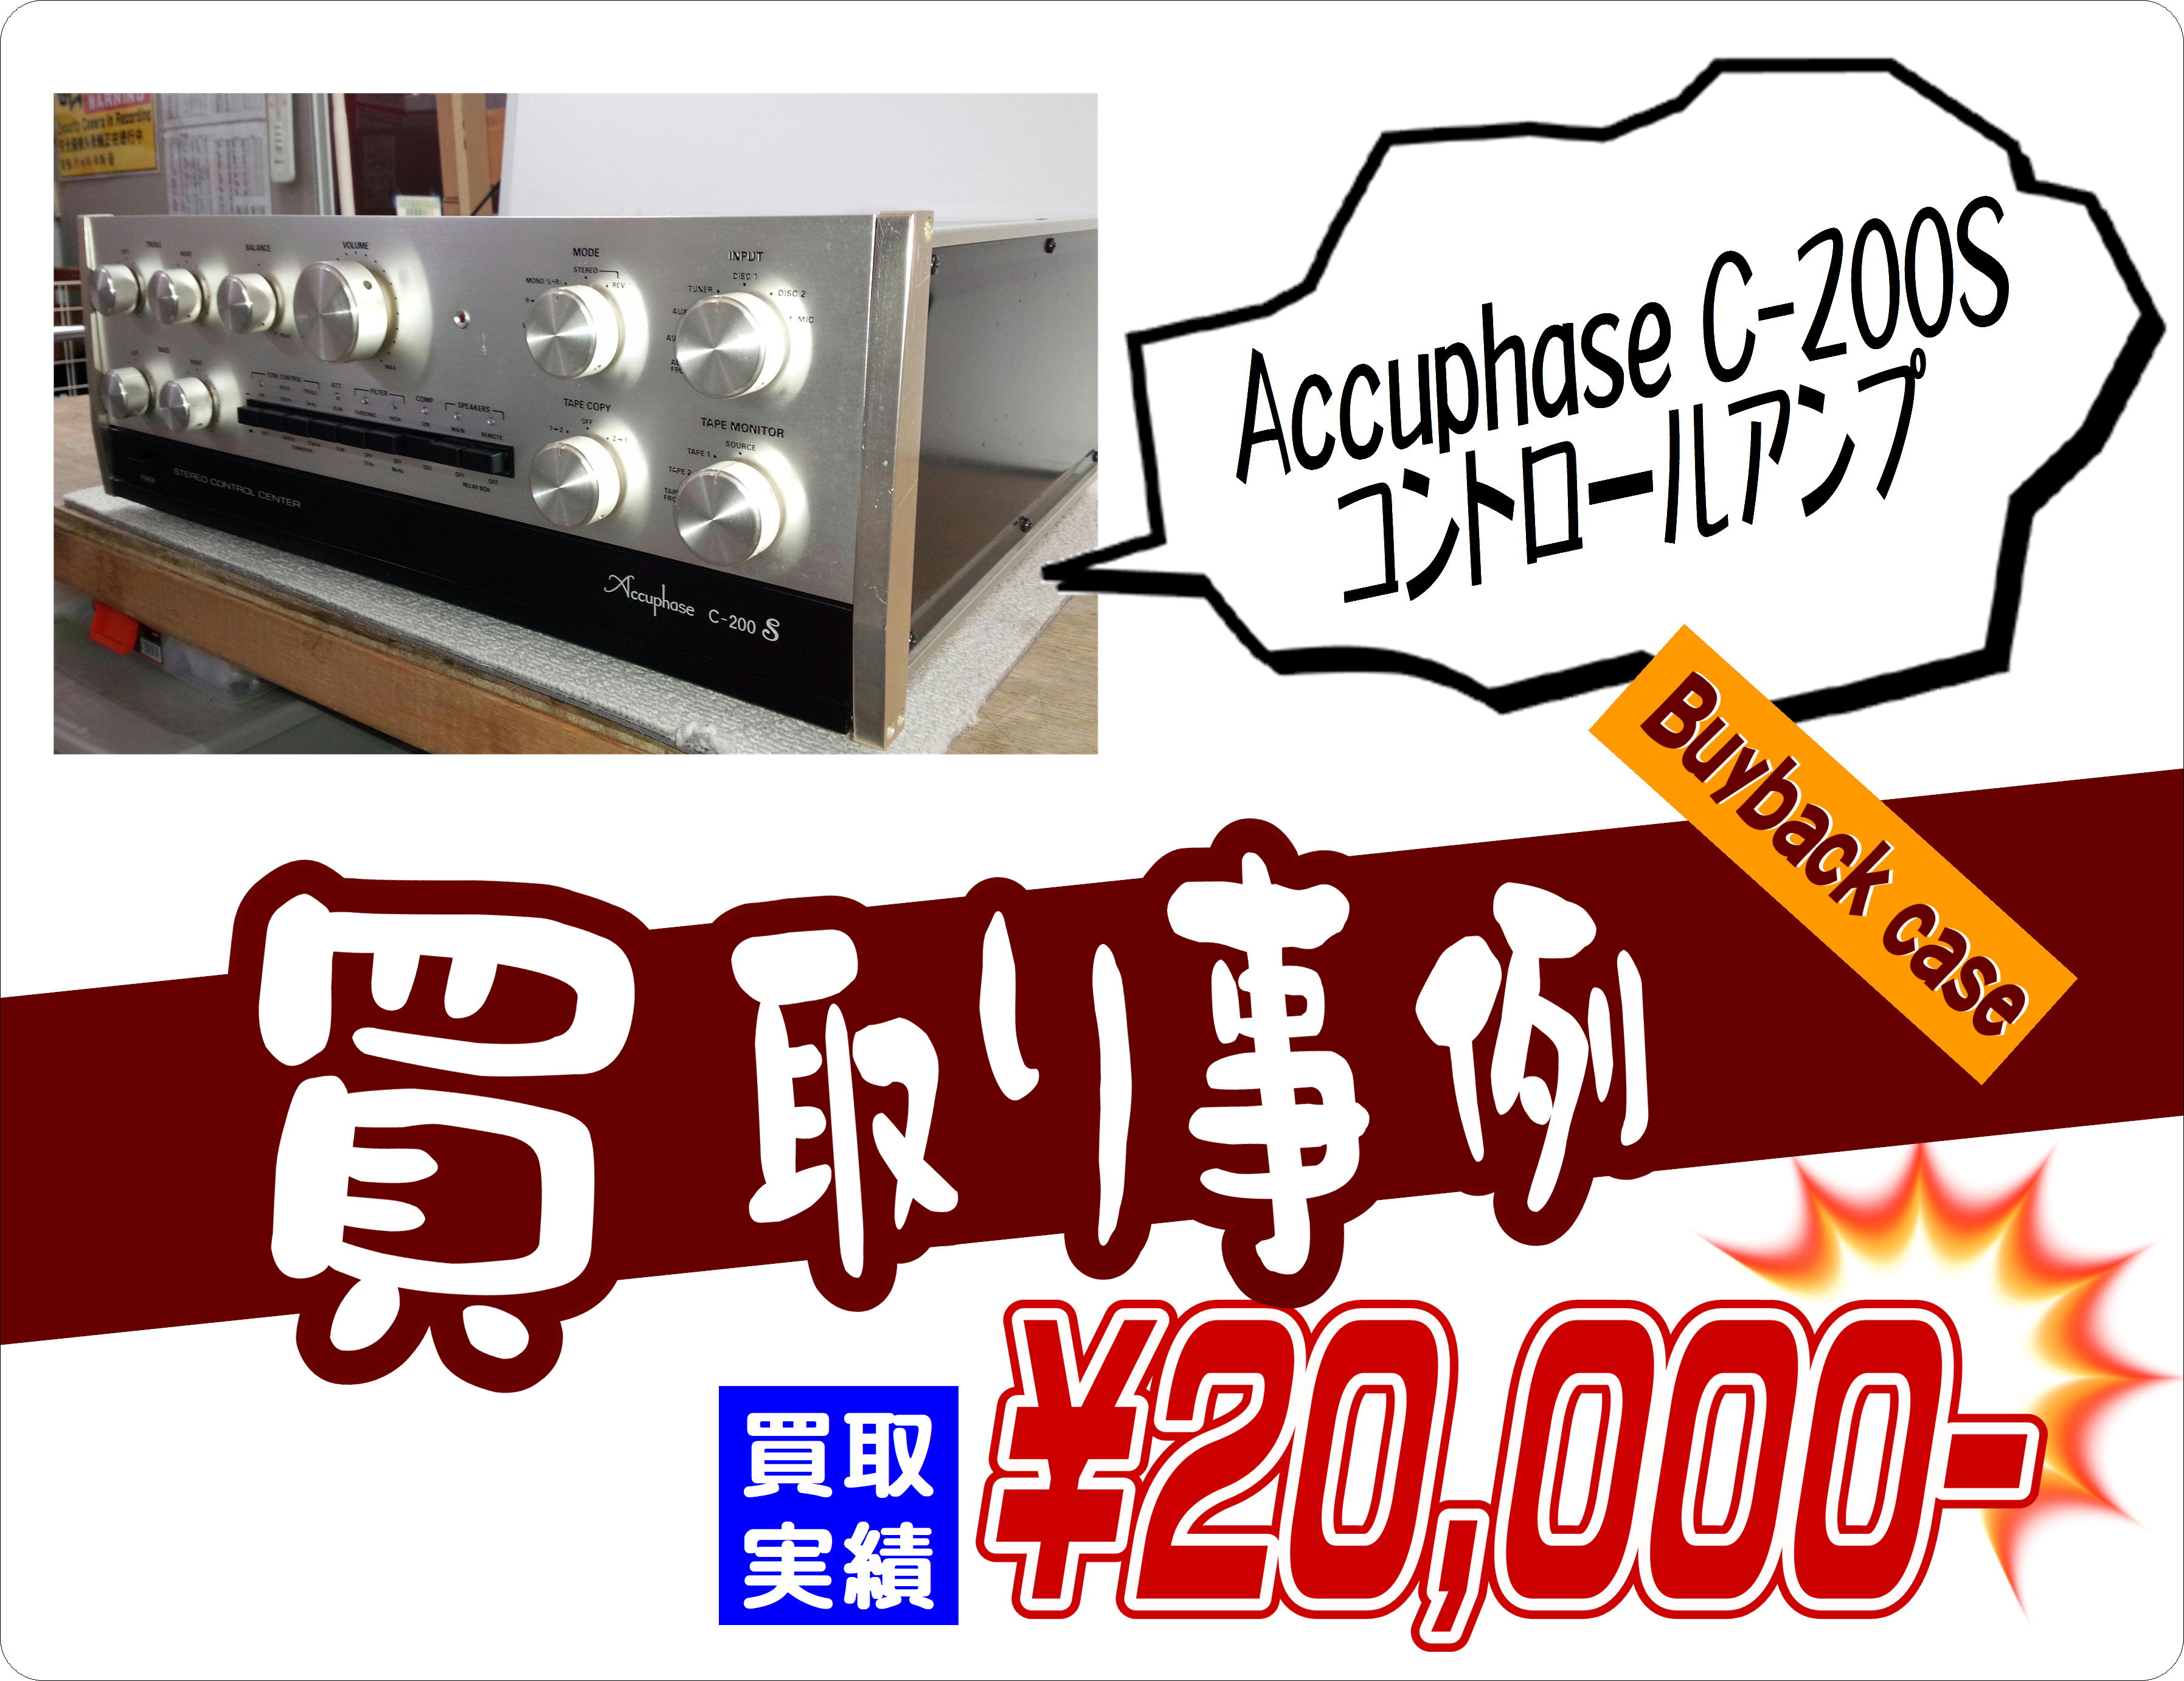 Accuphase C-200S コントロールアンプ